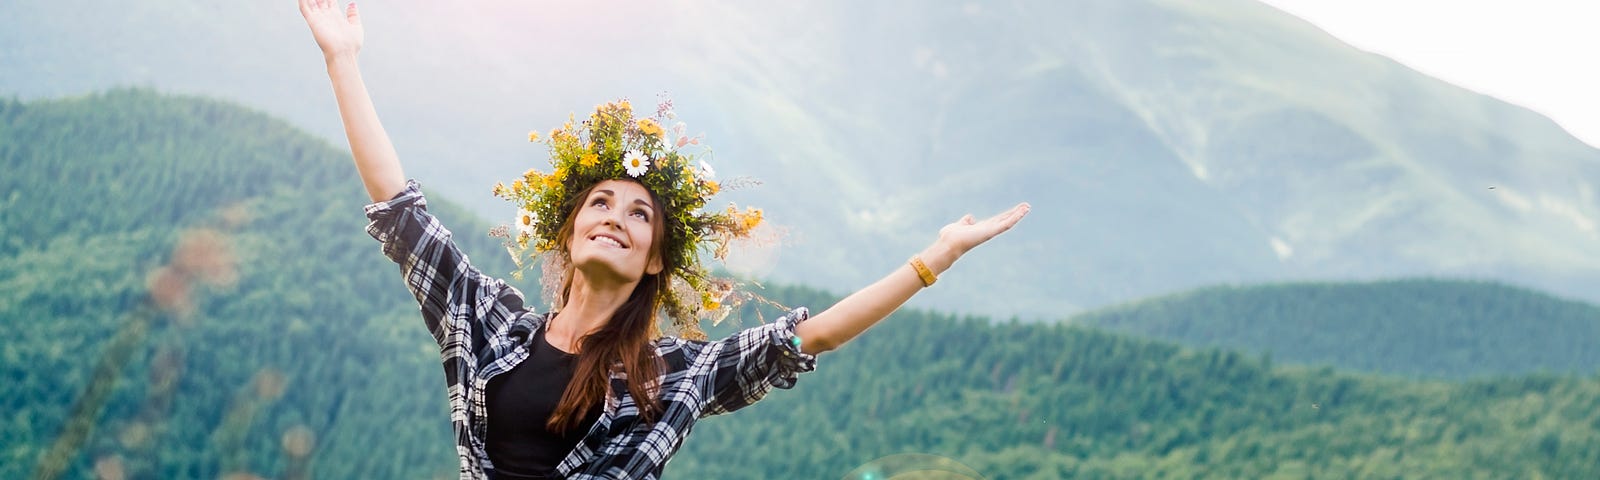 Joyous woman with flowers in her hair, arms outstretched in a mountain meadow!